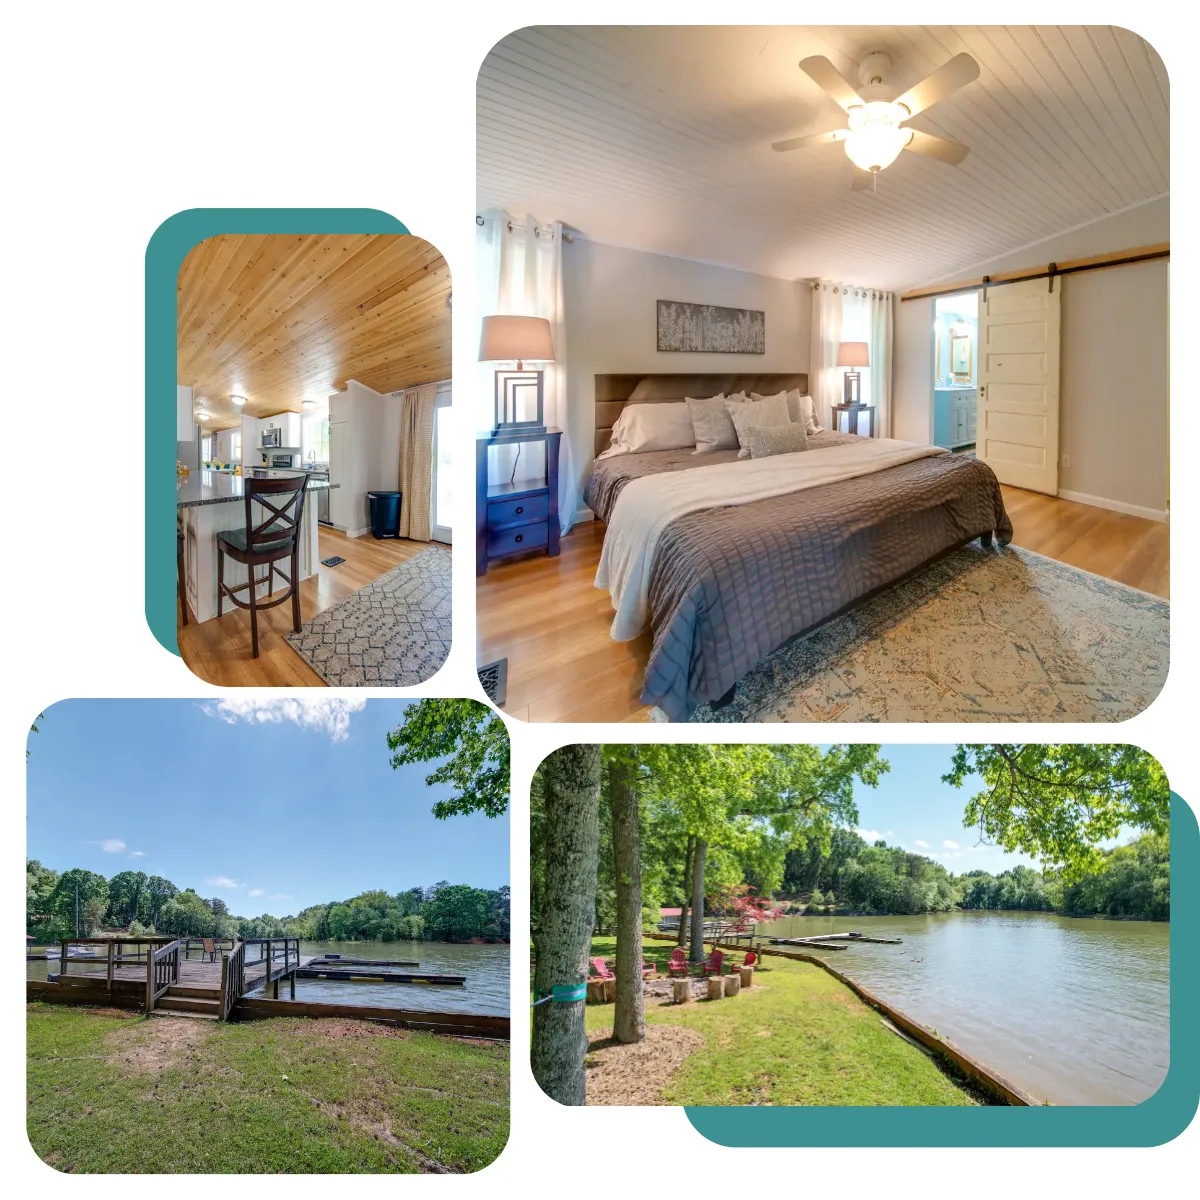 Enjoy the beauty of Lake Wylie Retreat with its serene lakeside setting, spacious bedrooms, luxurious spa-like primary bedroom, and fully-equipped kitchen, all on nearly one acre of land with delightful outdoor spaces.